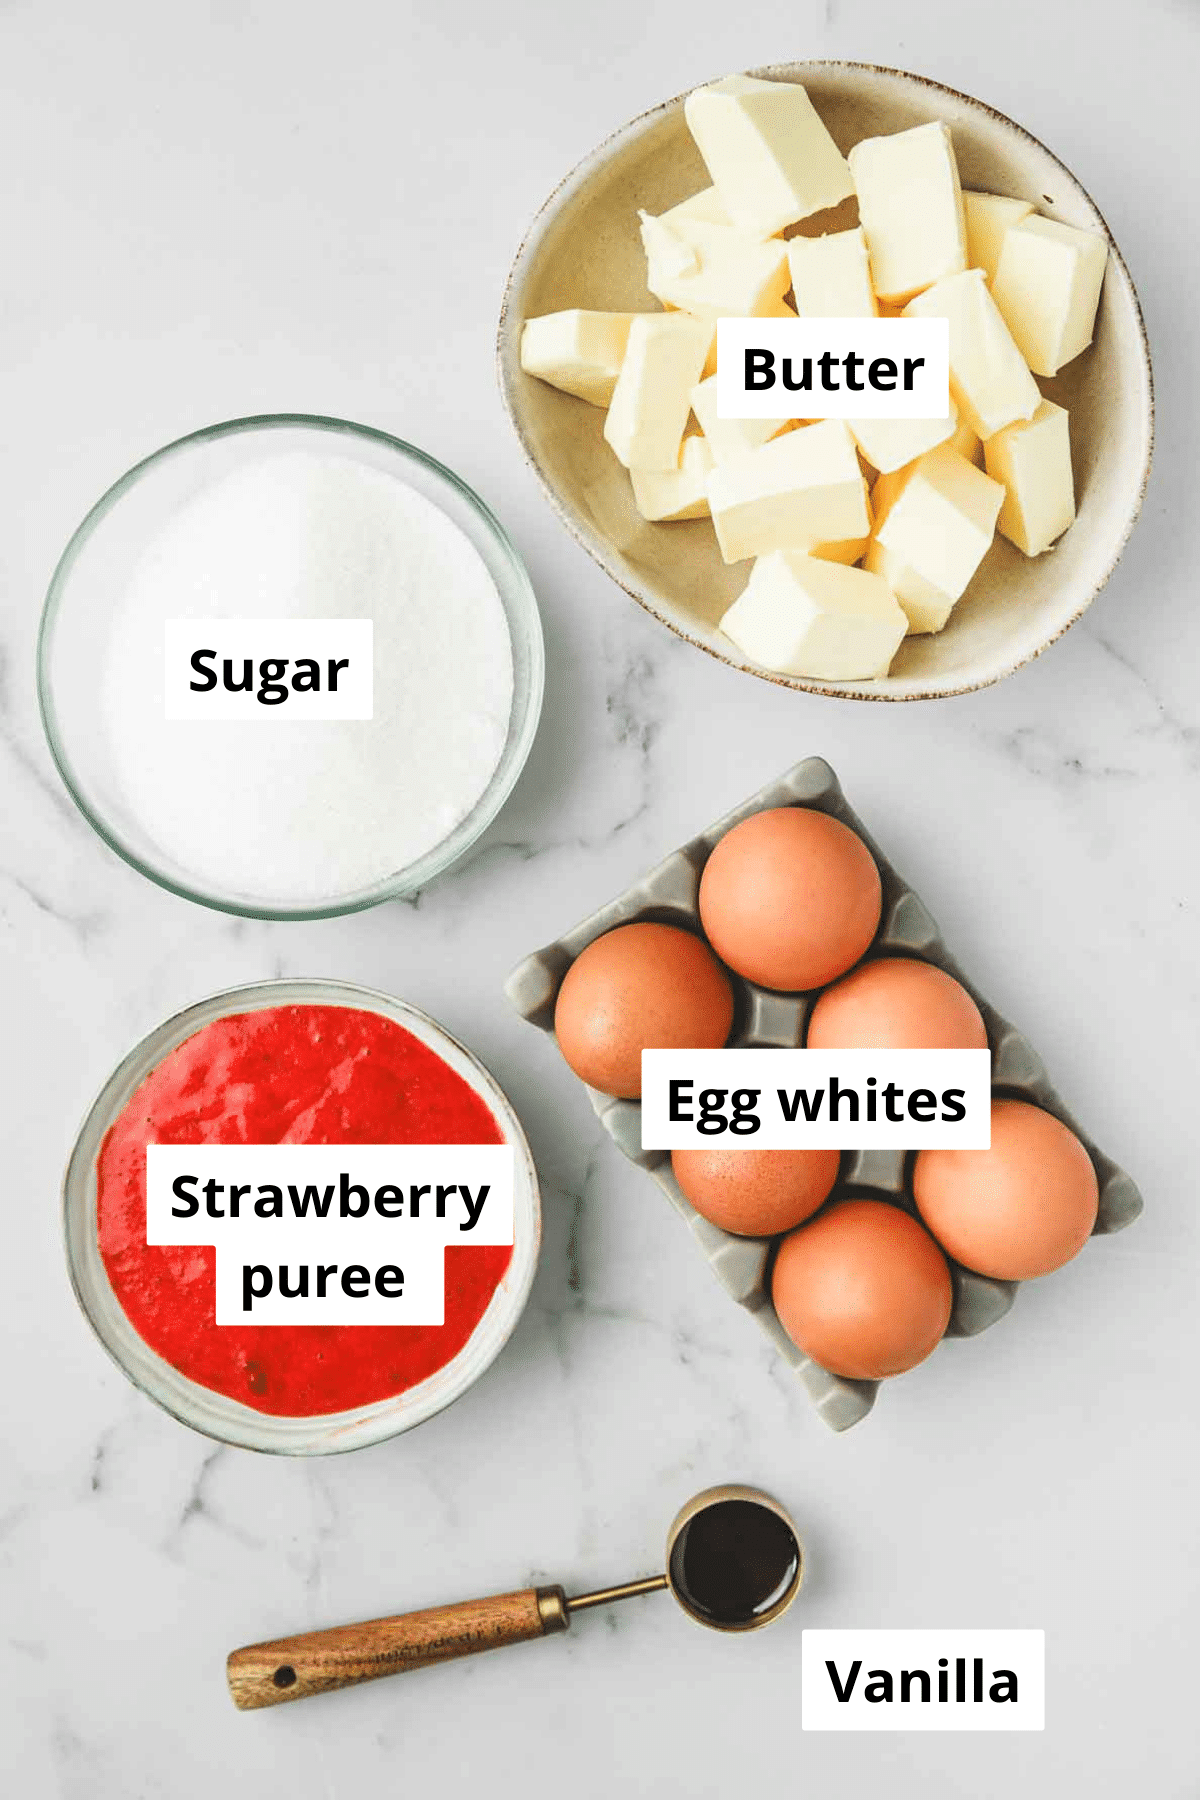 bowls with ingredients for strawberry swiss meringue buttercream